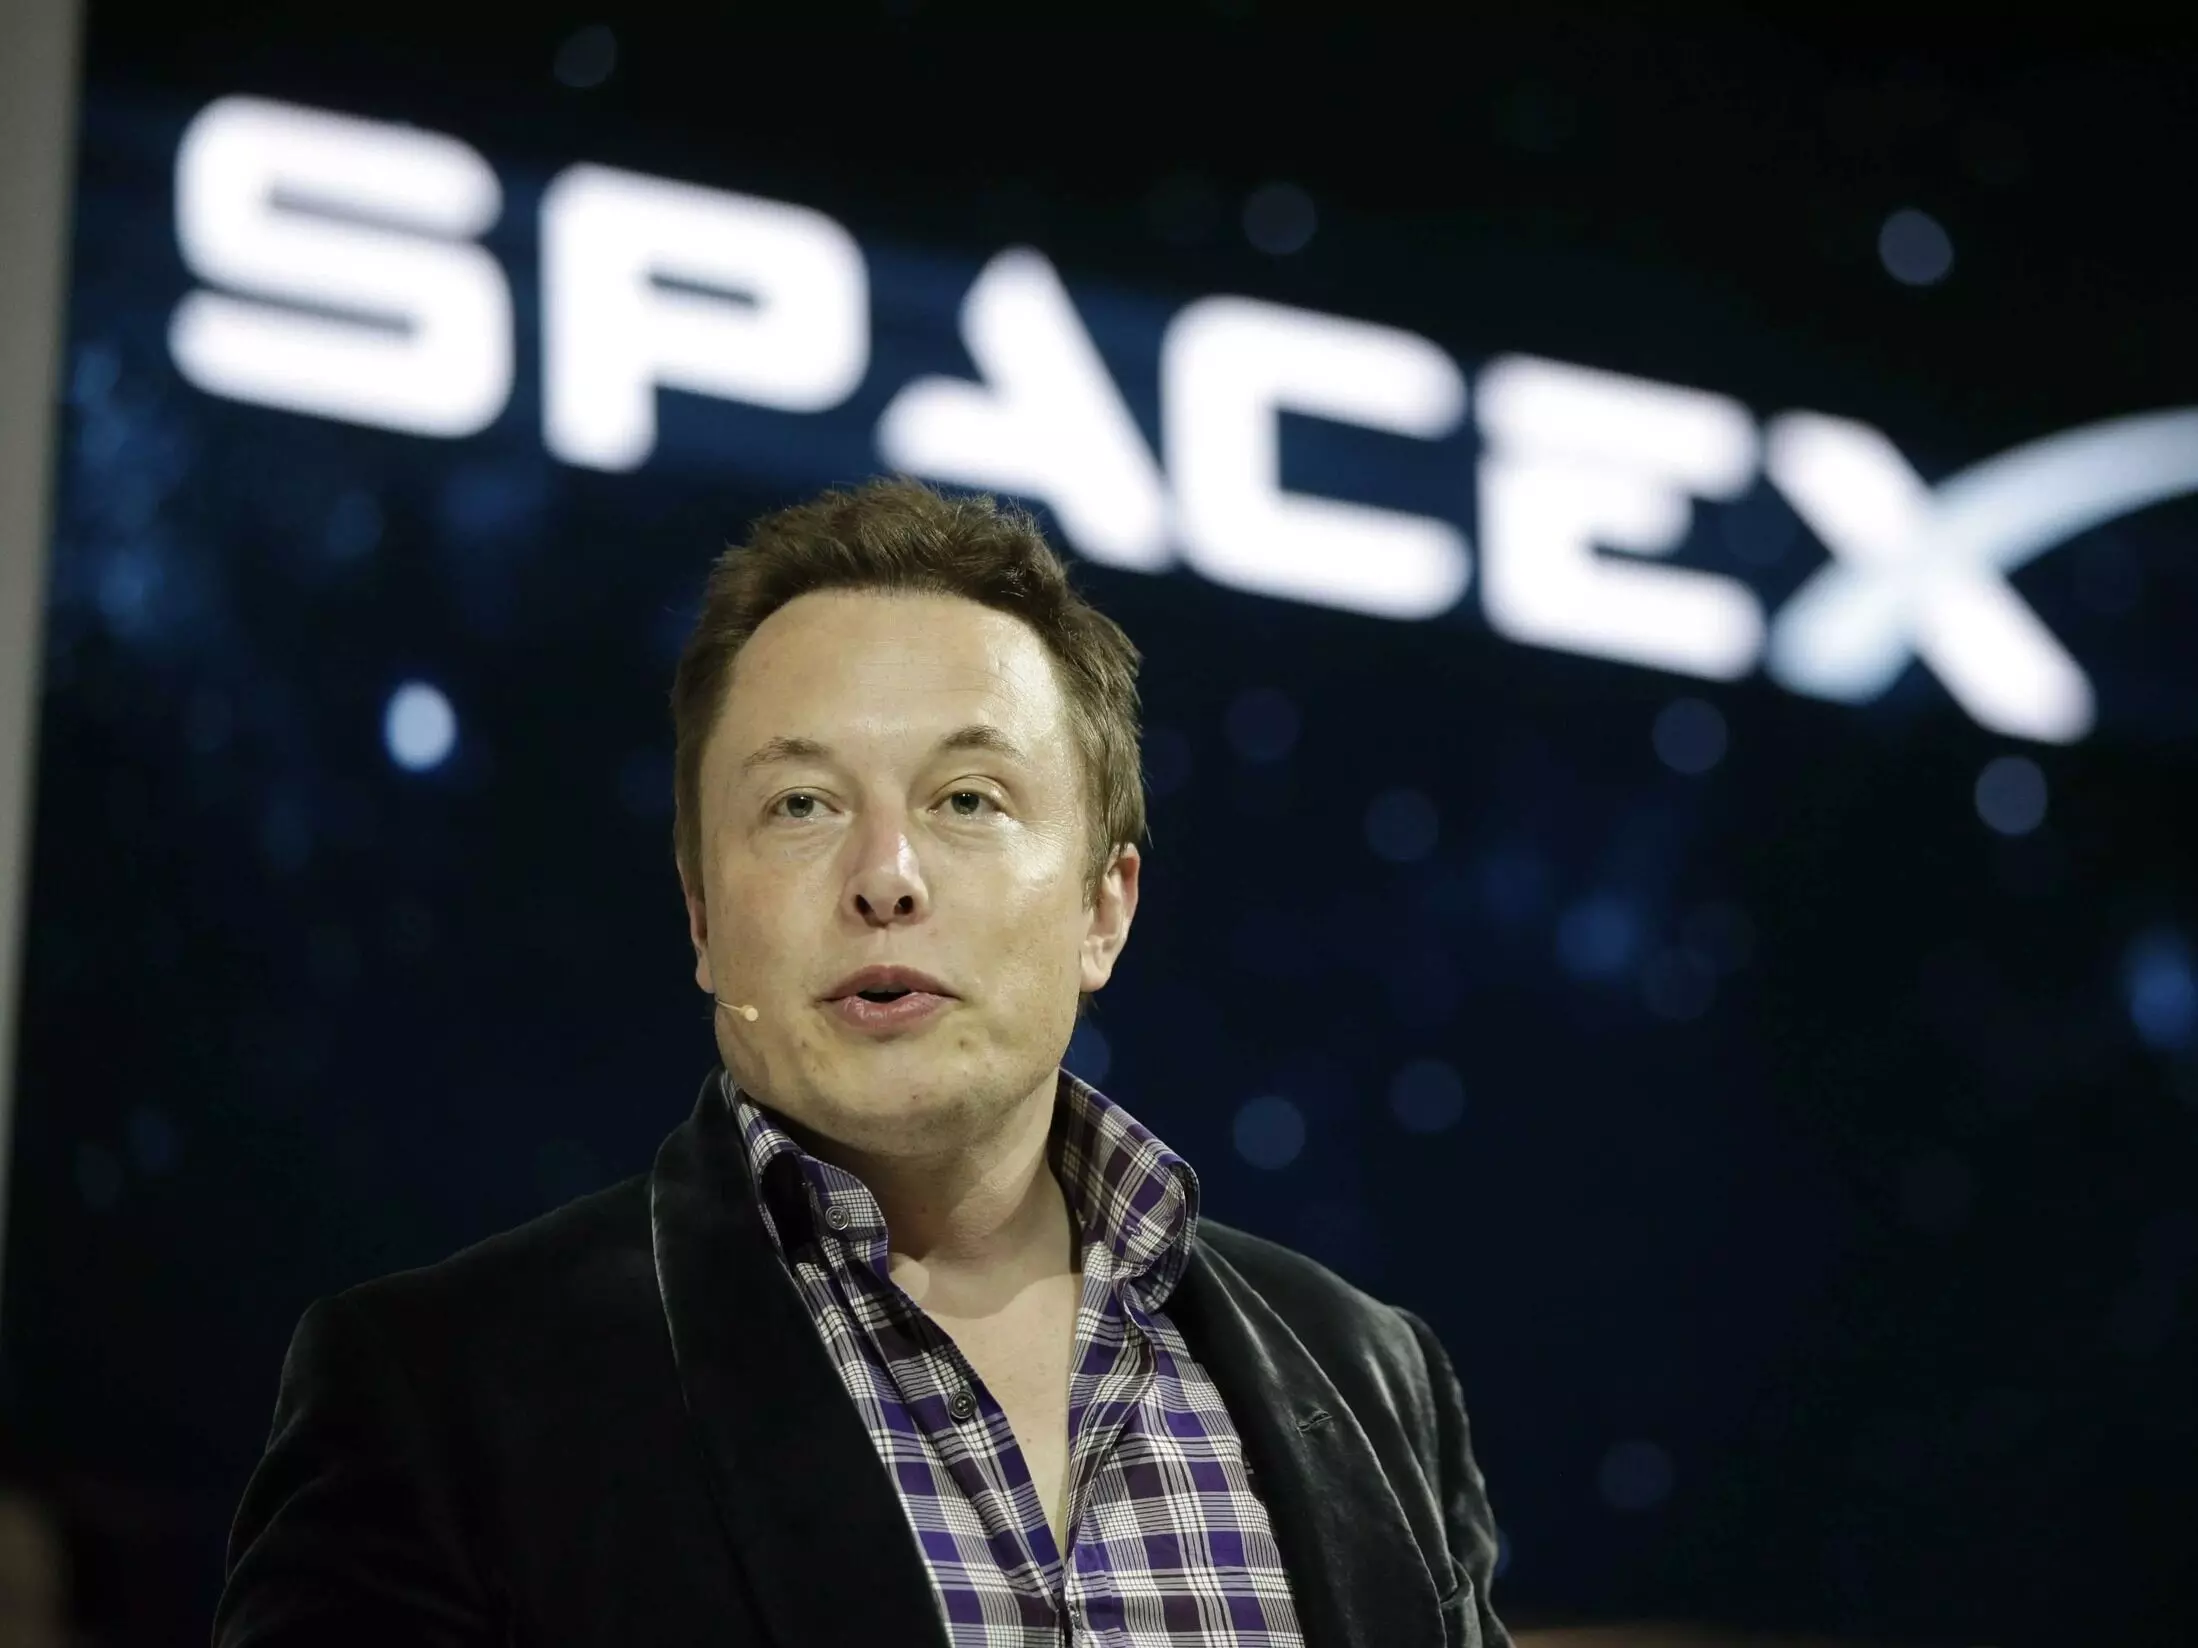 US sues Musk’s SpaceX for discriminatory hiring policy